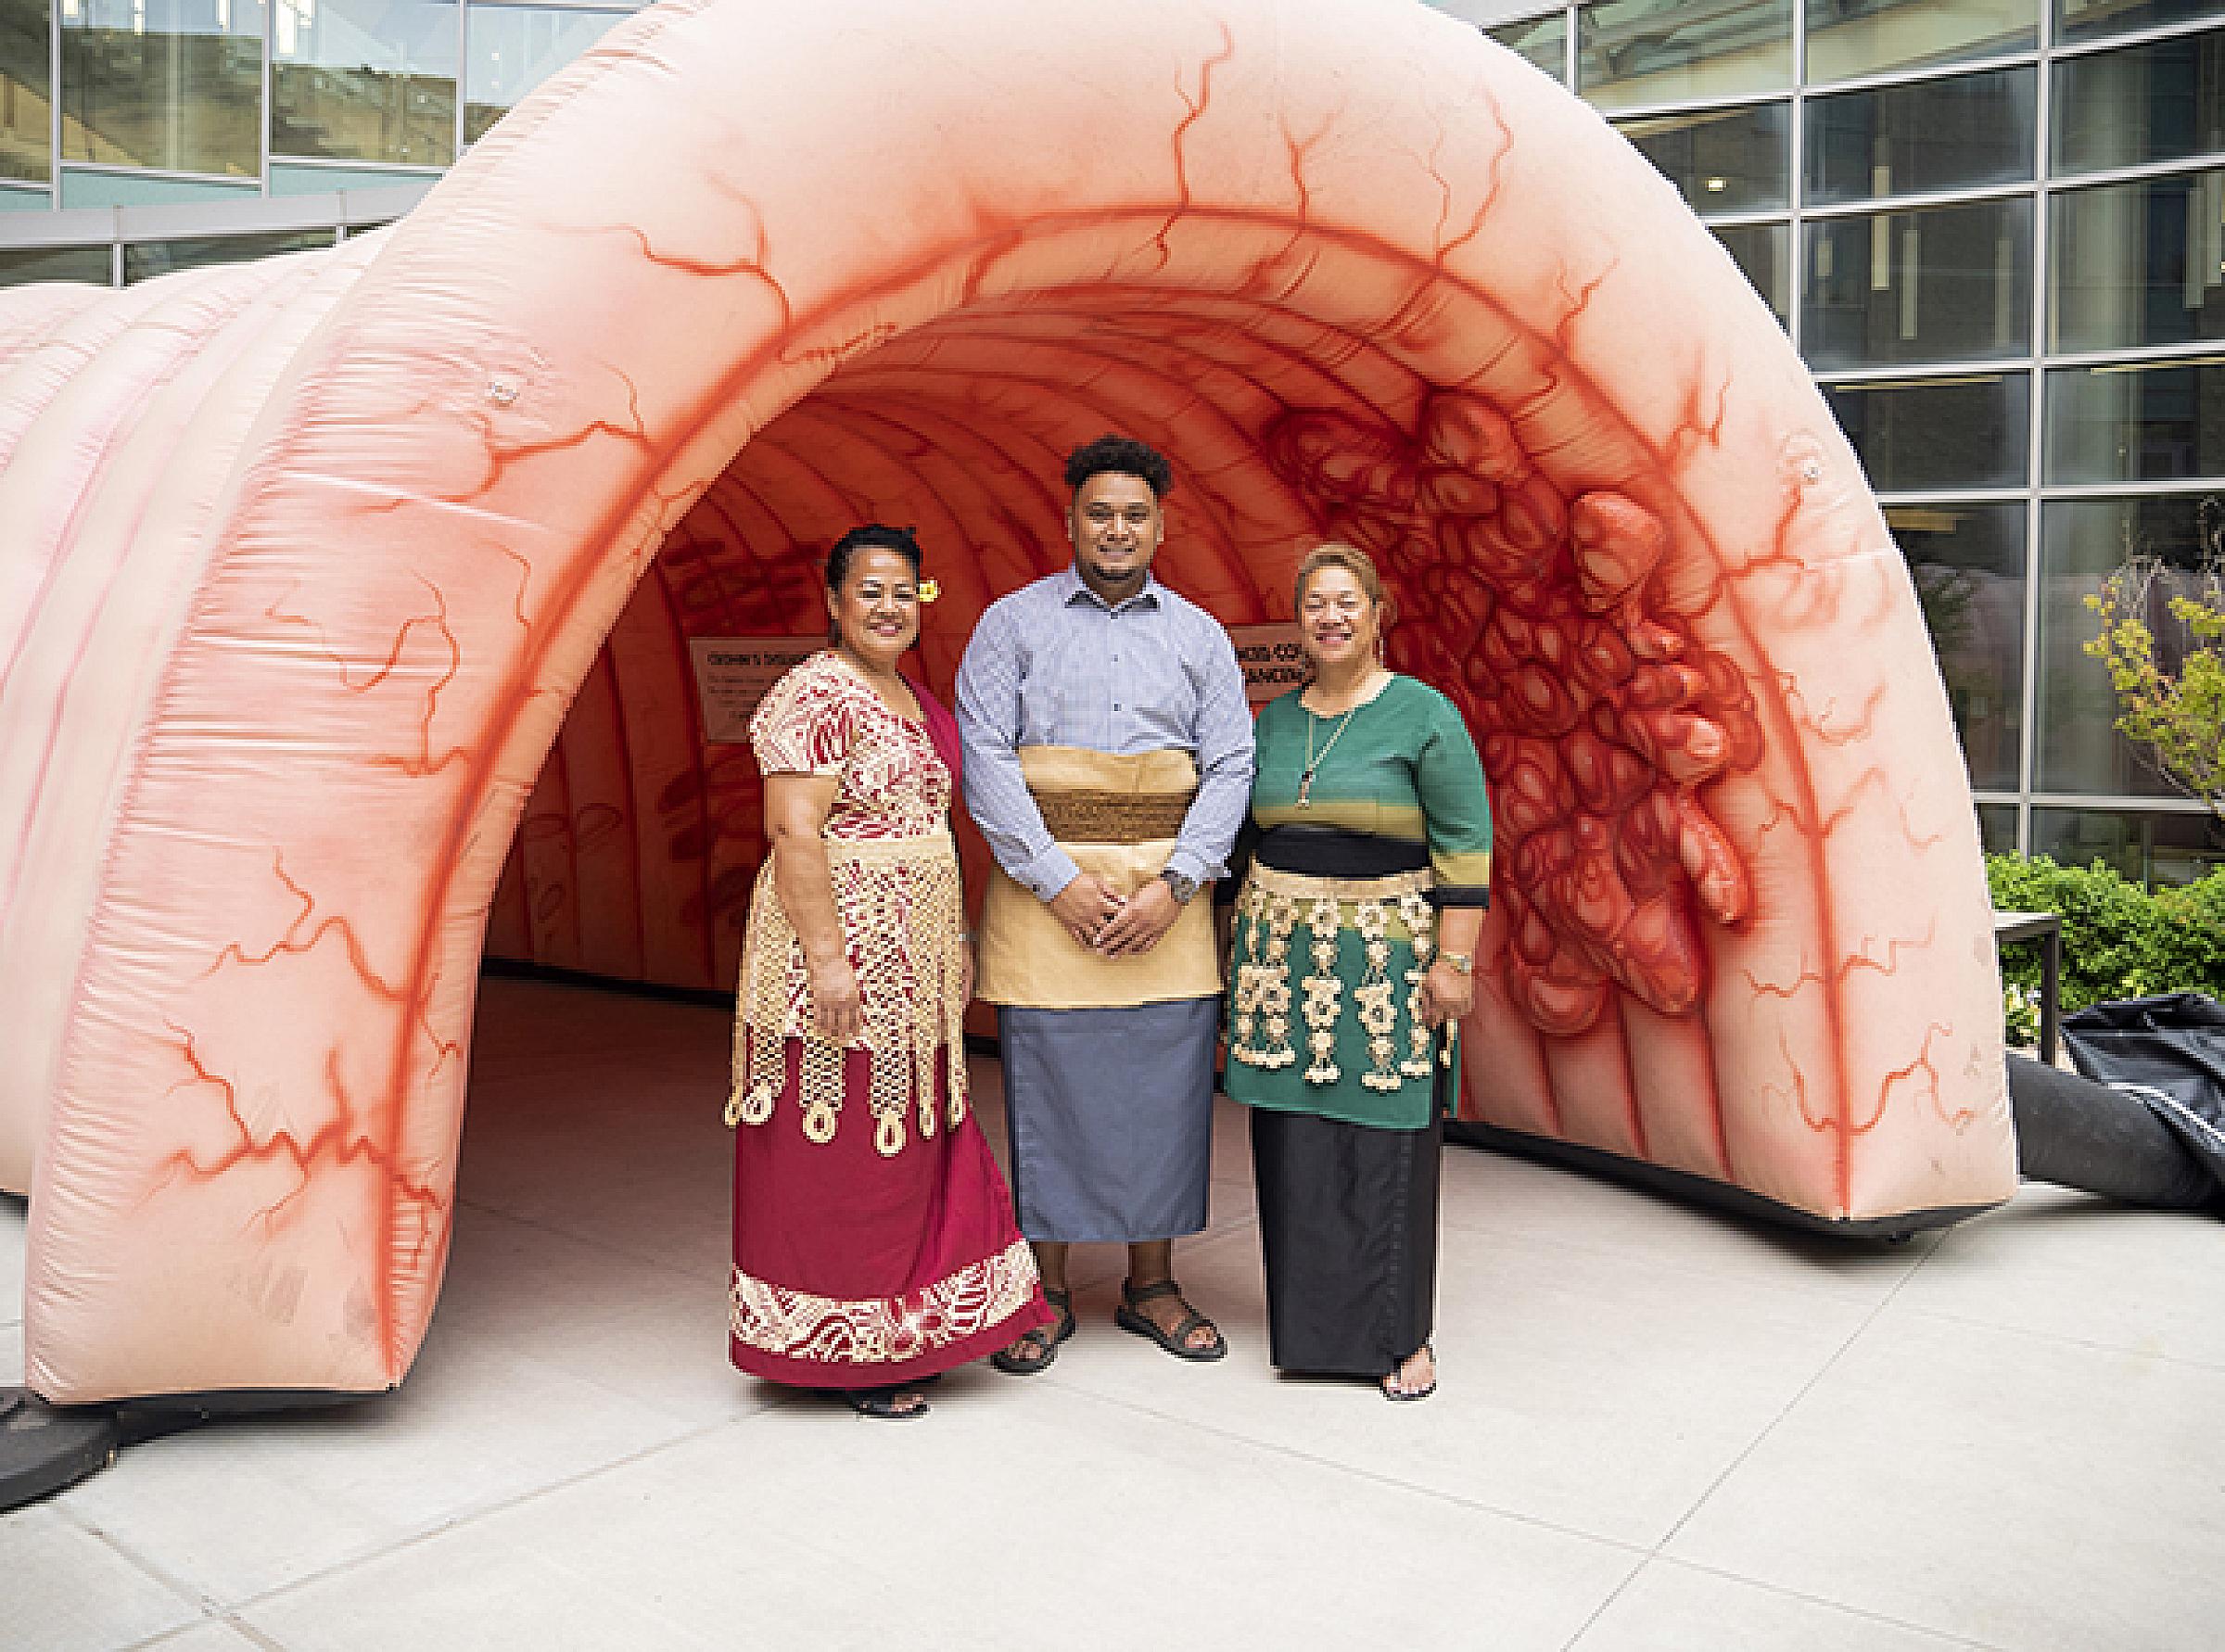 Members of the Pacific Islander Community with HCI's inflatable colon exhibit